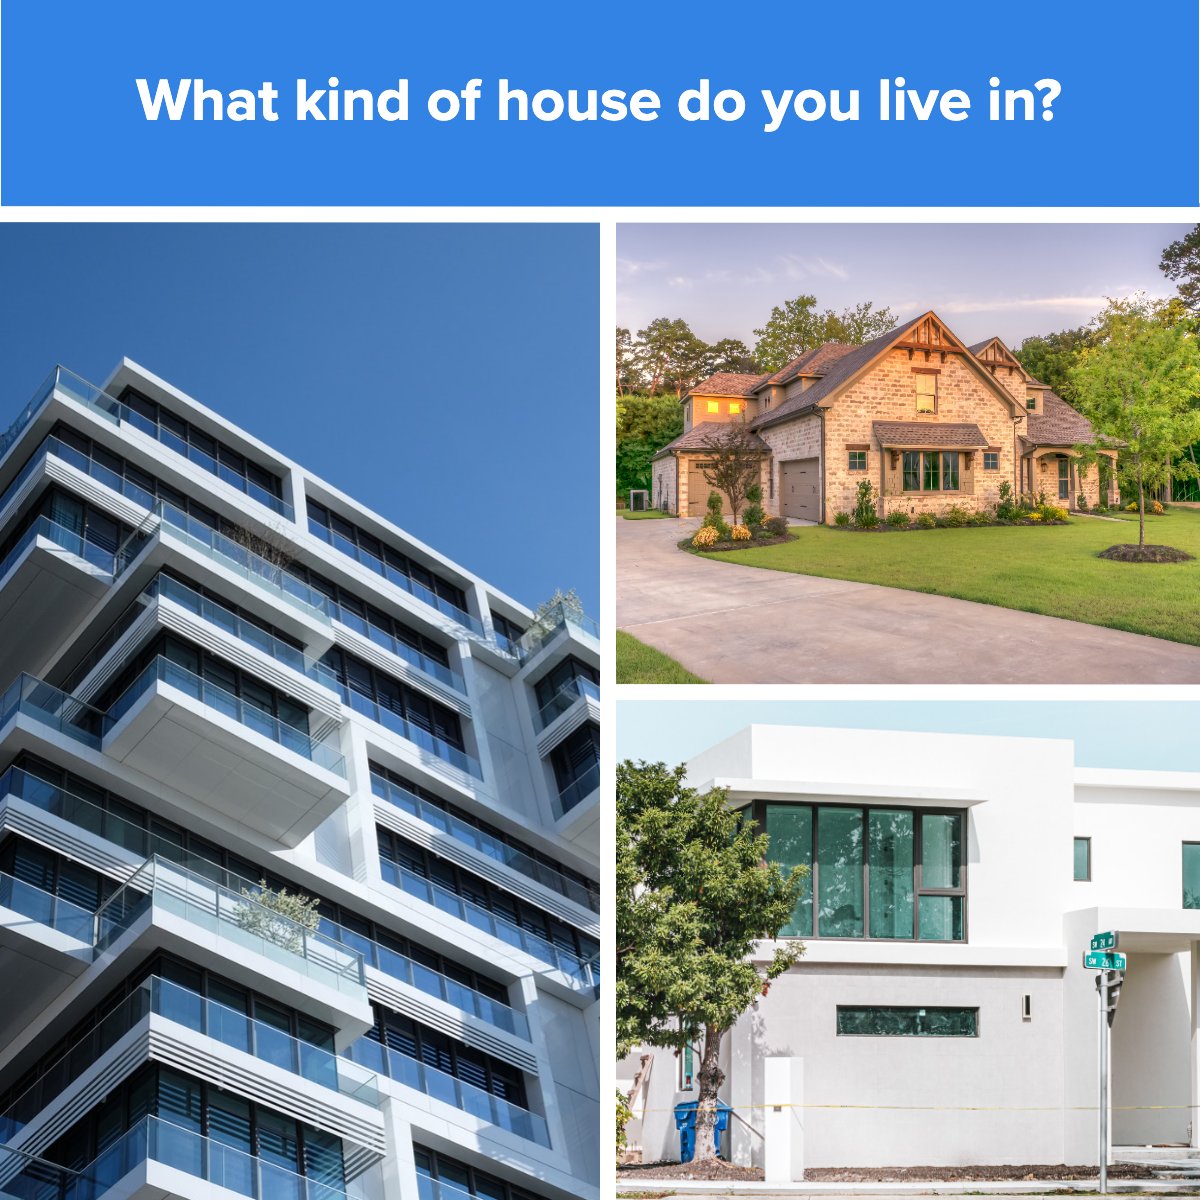 What kind of house do you live in? 🏡

#kindofhouse #housetype #realestate #question #singlefamilyhome #condo #townhouse
 #McHoneLuxuryTeam #DanielMcHone #GlobalLuxury #ColdwellBanker #LuxuryLifestyle #LuxuryService #RealEstate #Waterfront #Luxury